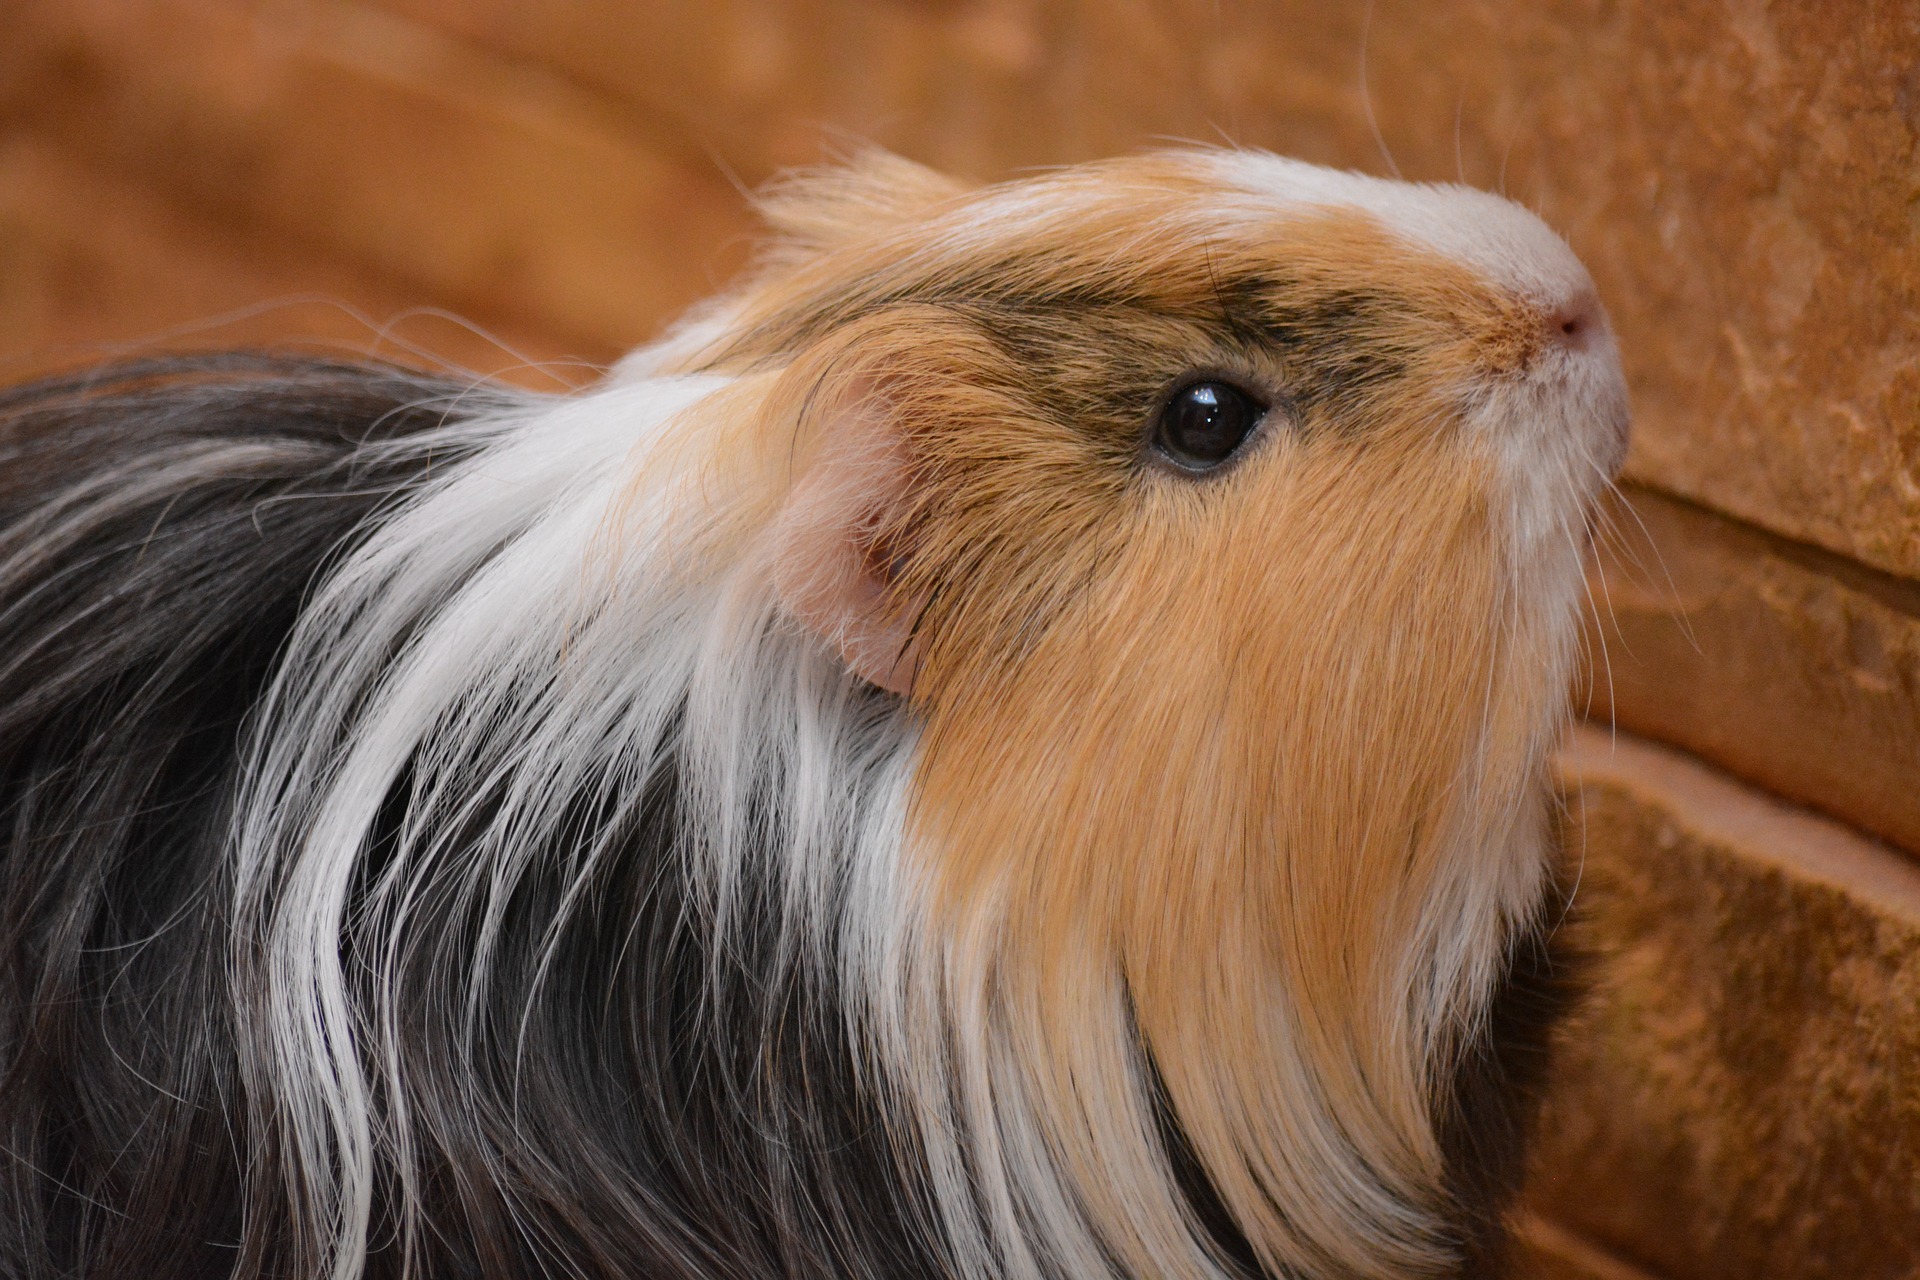 6 Reasons to Consider Getting a Pet Guinea Pig